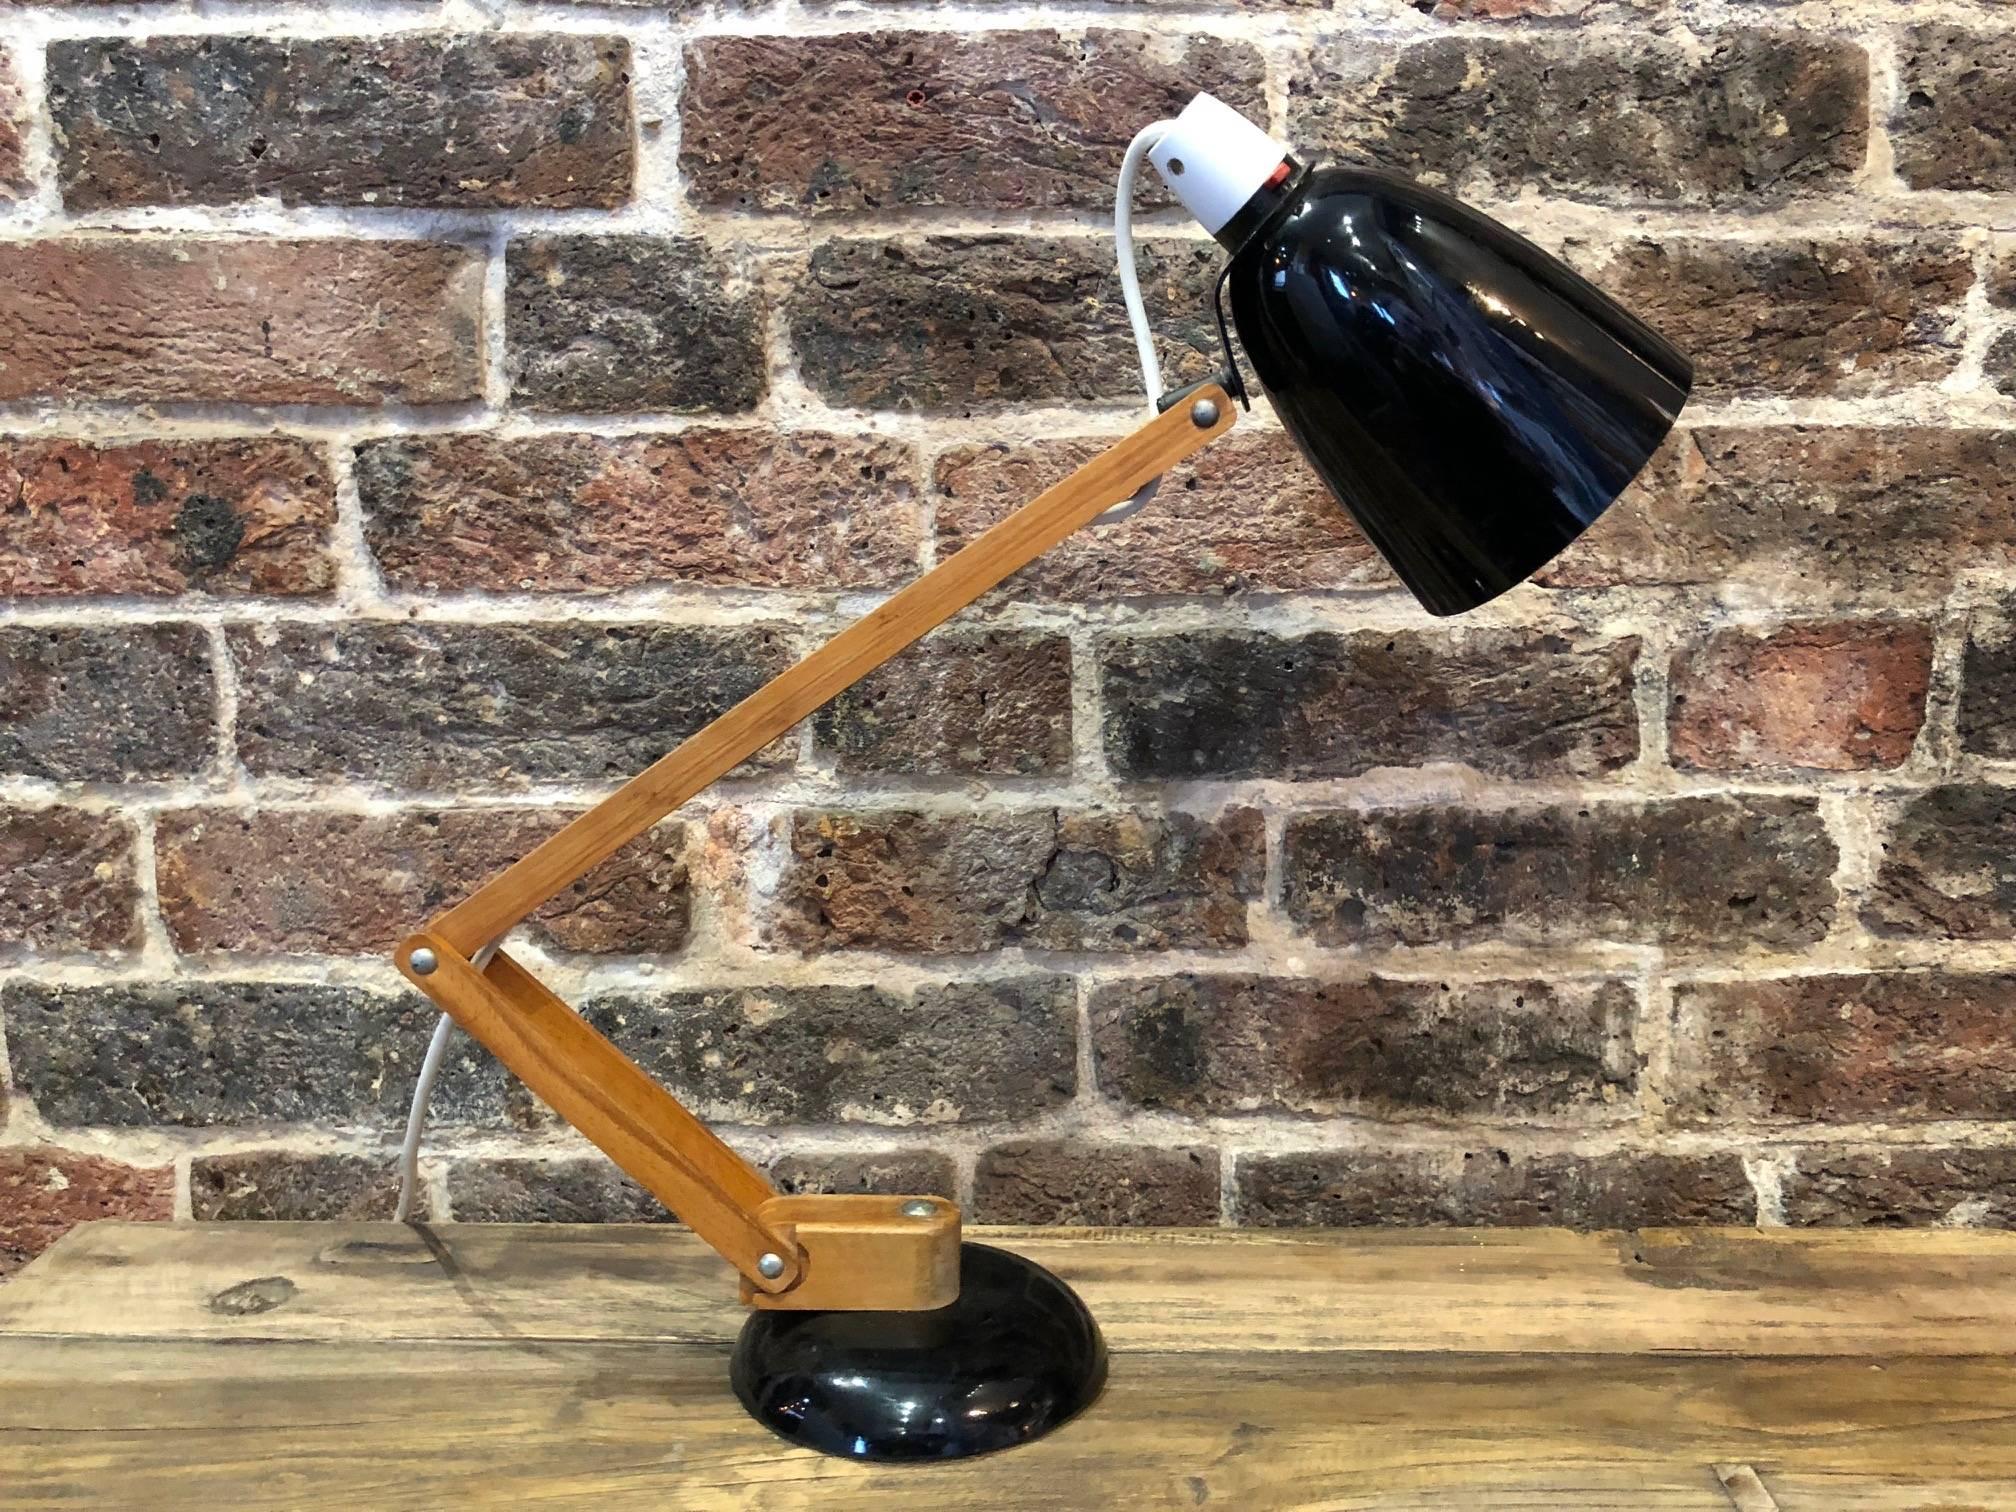 Vintage Maclamp desk or table lamp in black with much sought-after wooden arms. With original bulbholder and flex.

Designed by Terence Conran for Habitat in the 1950s, this lamp is an icon of the 1950-1960s period.

In overall good vintage